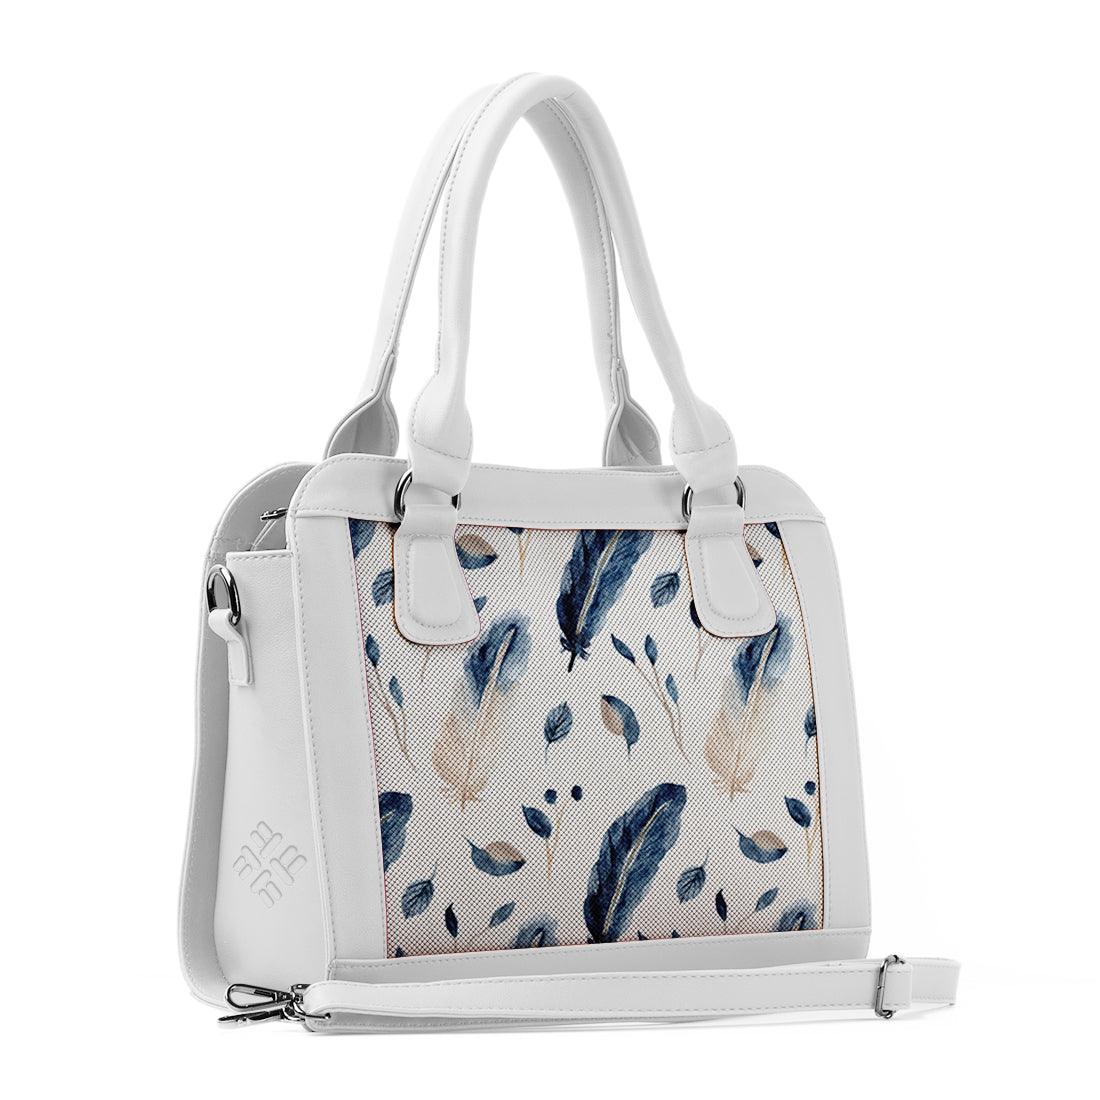 White Travel Hobo Bag Feathers